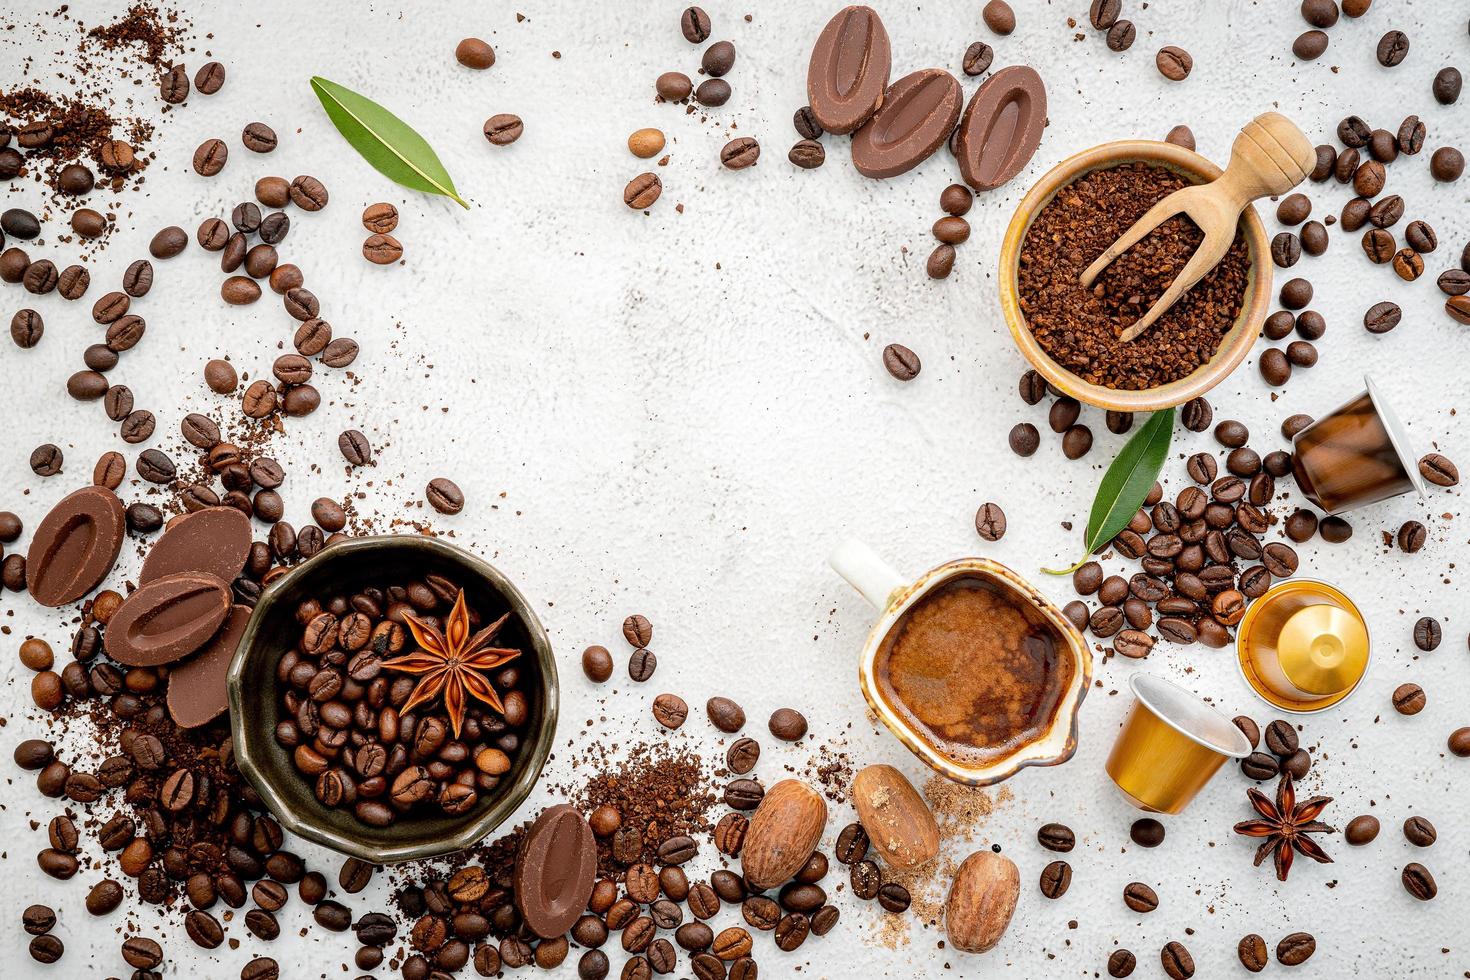 Roasted coffee beans with scoop photo